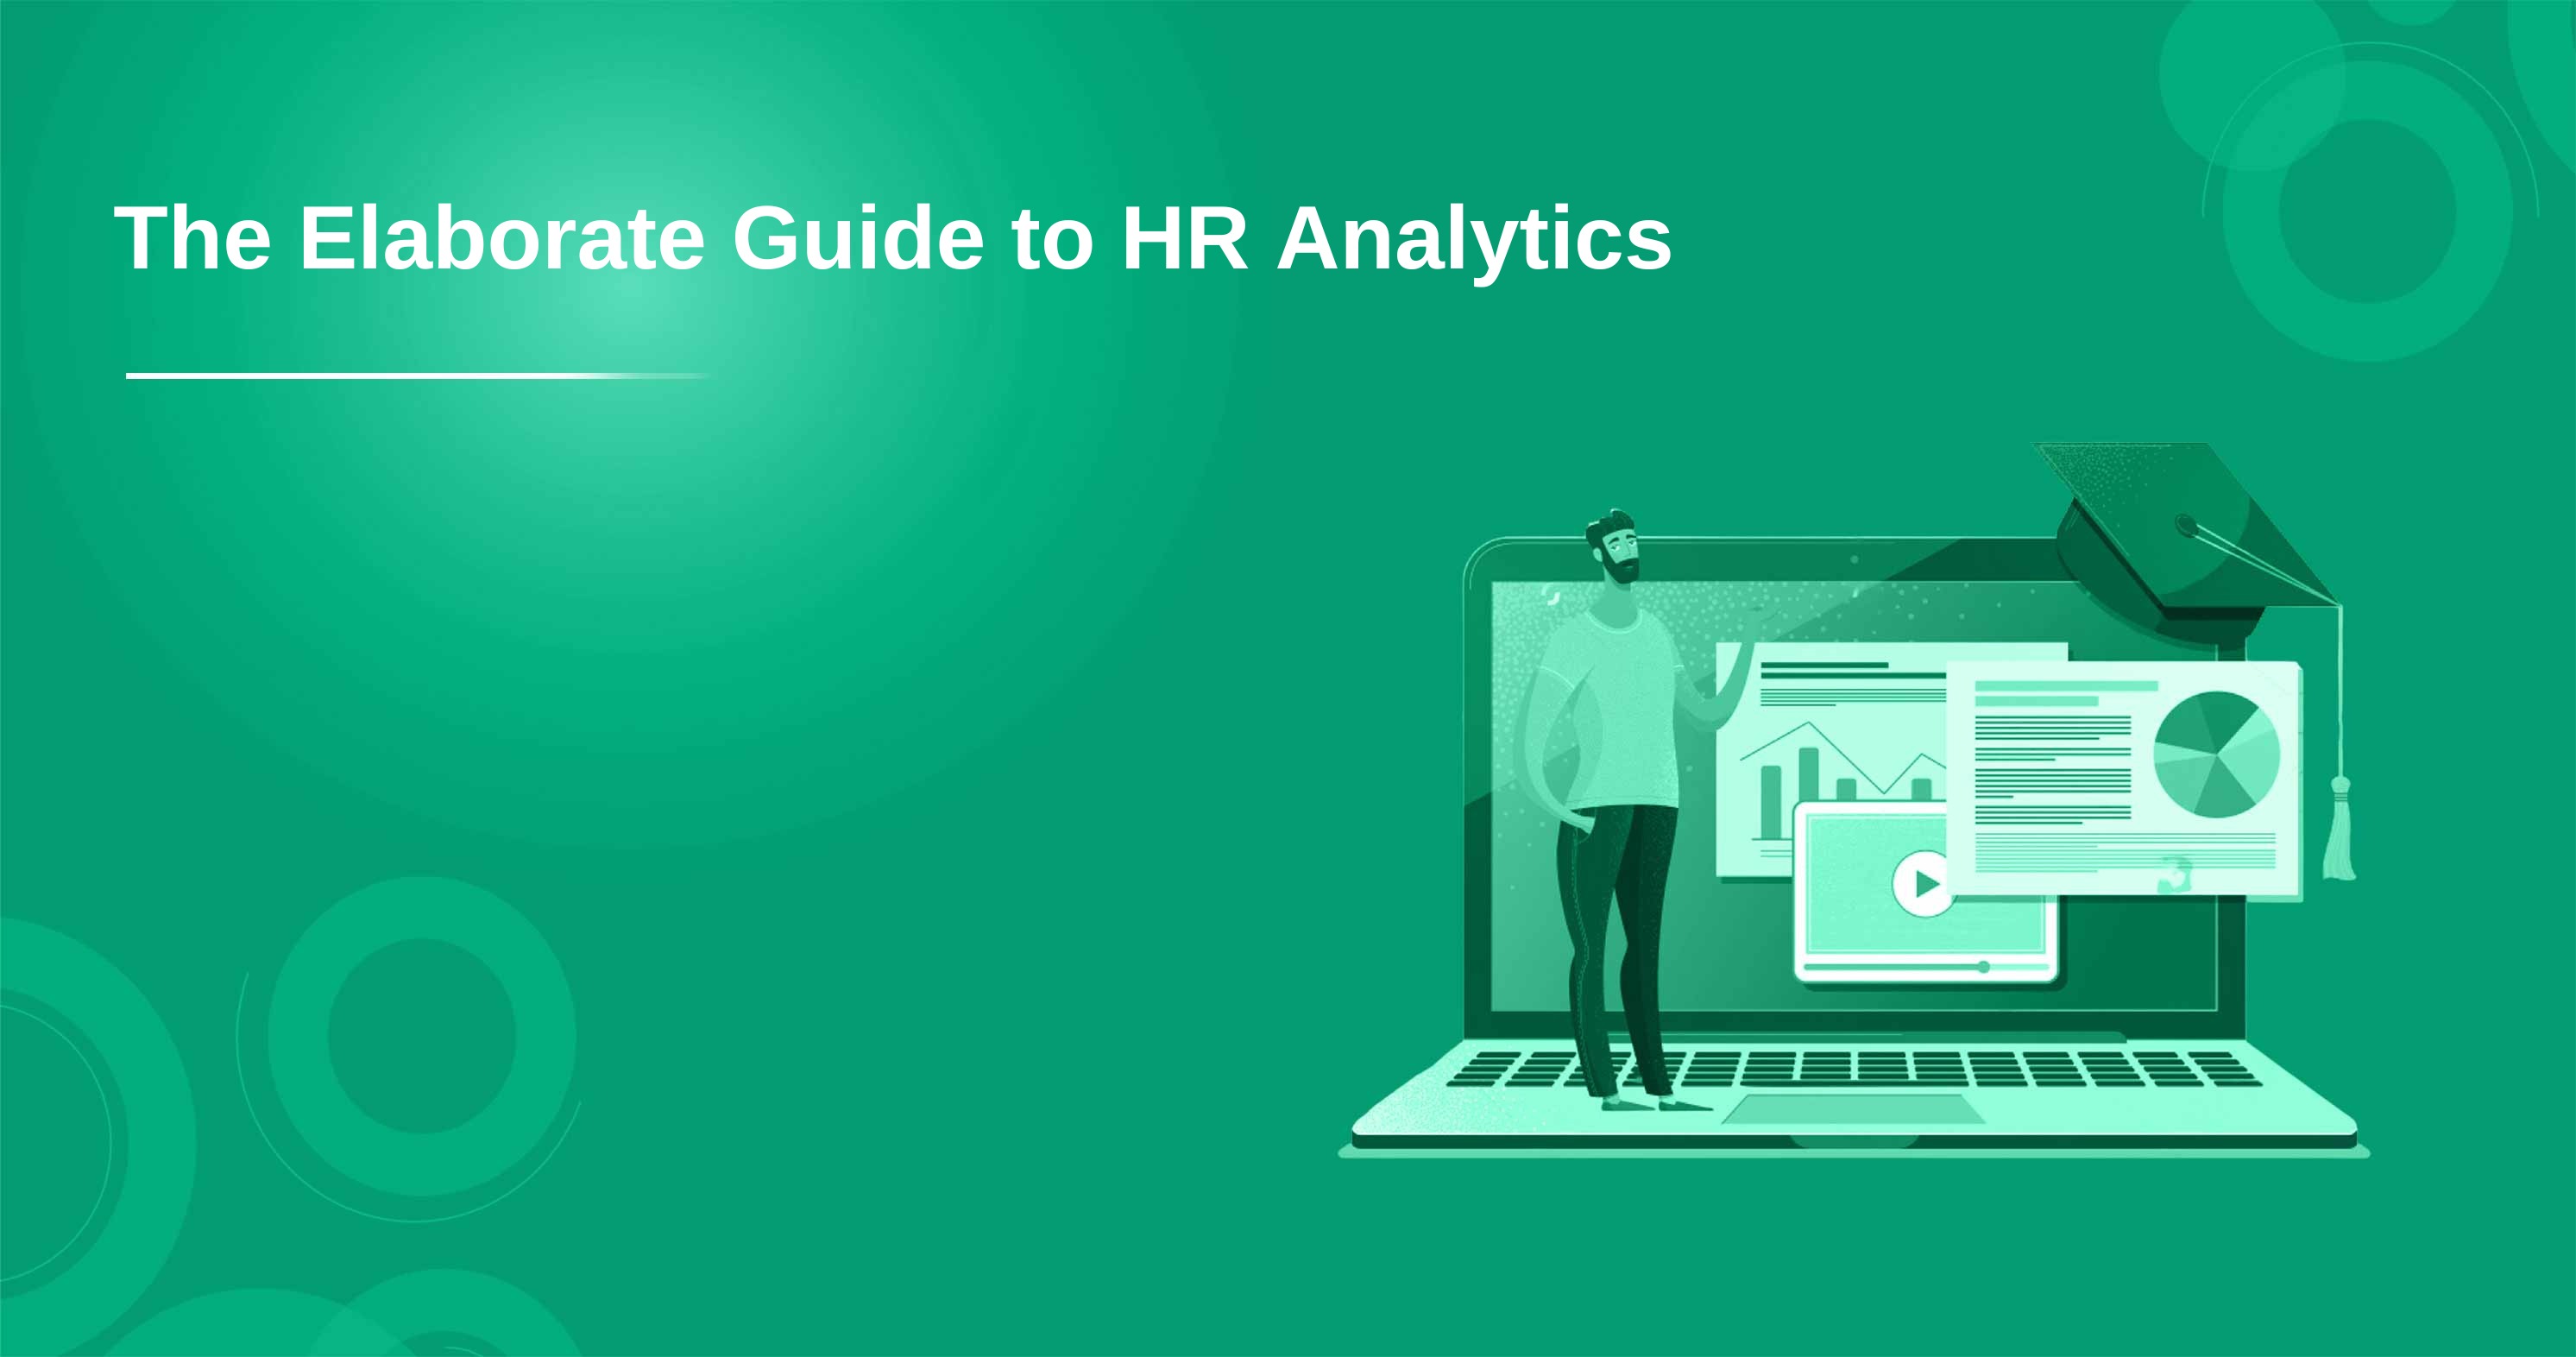 The Elaborate Guide to HR Analytics